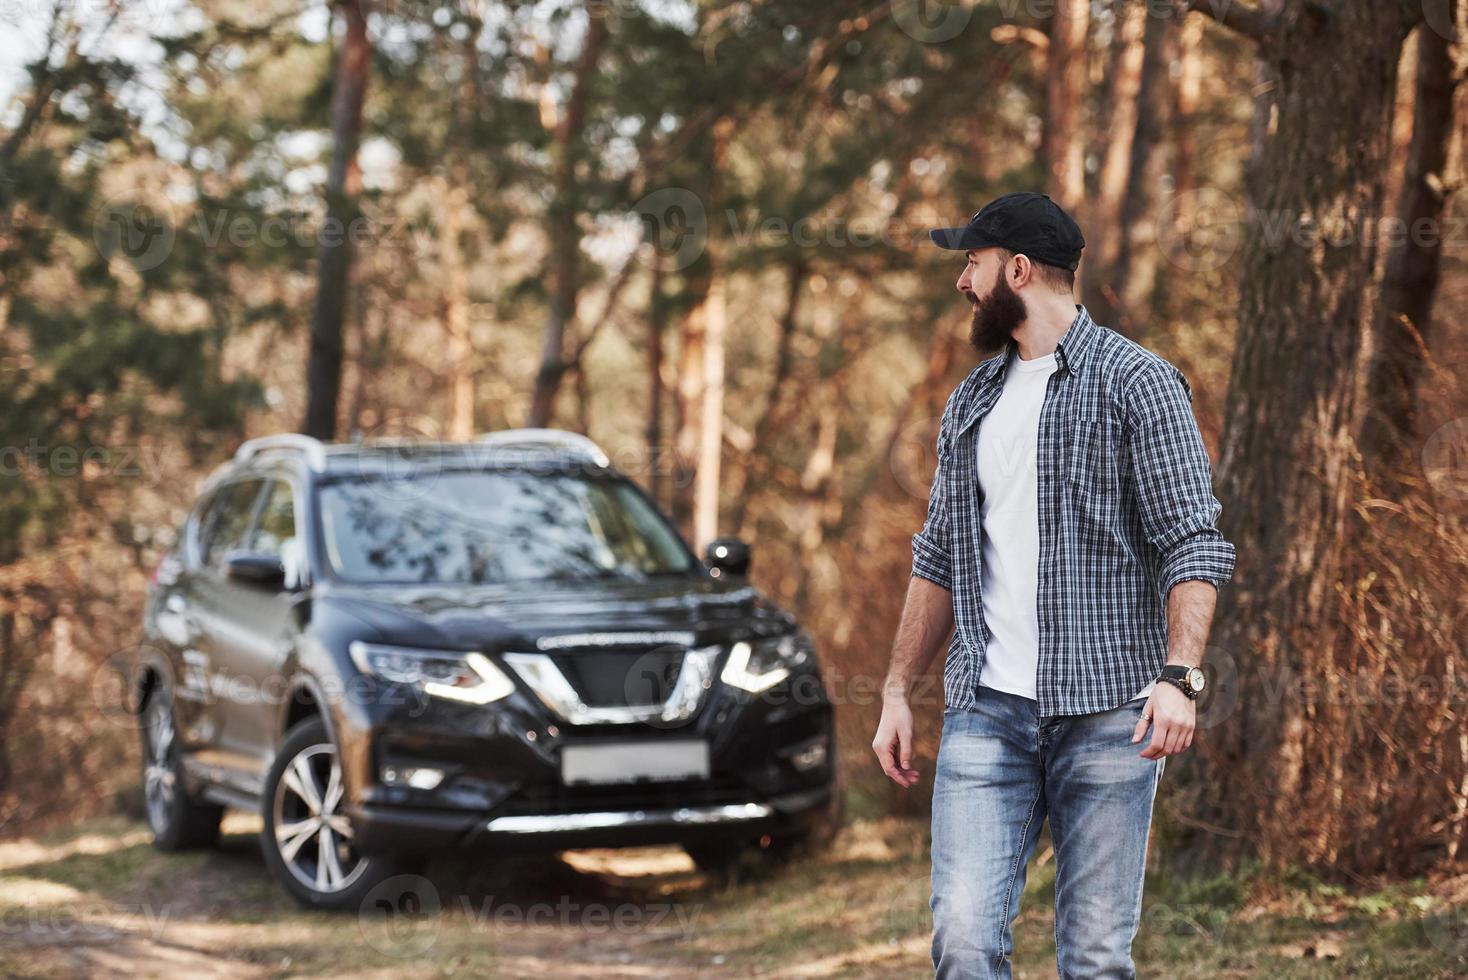 Mature guy have a walk. Bearded man near his brand new black car in the forest. Vacations concept photo